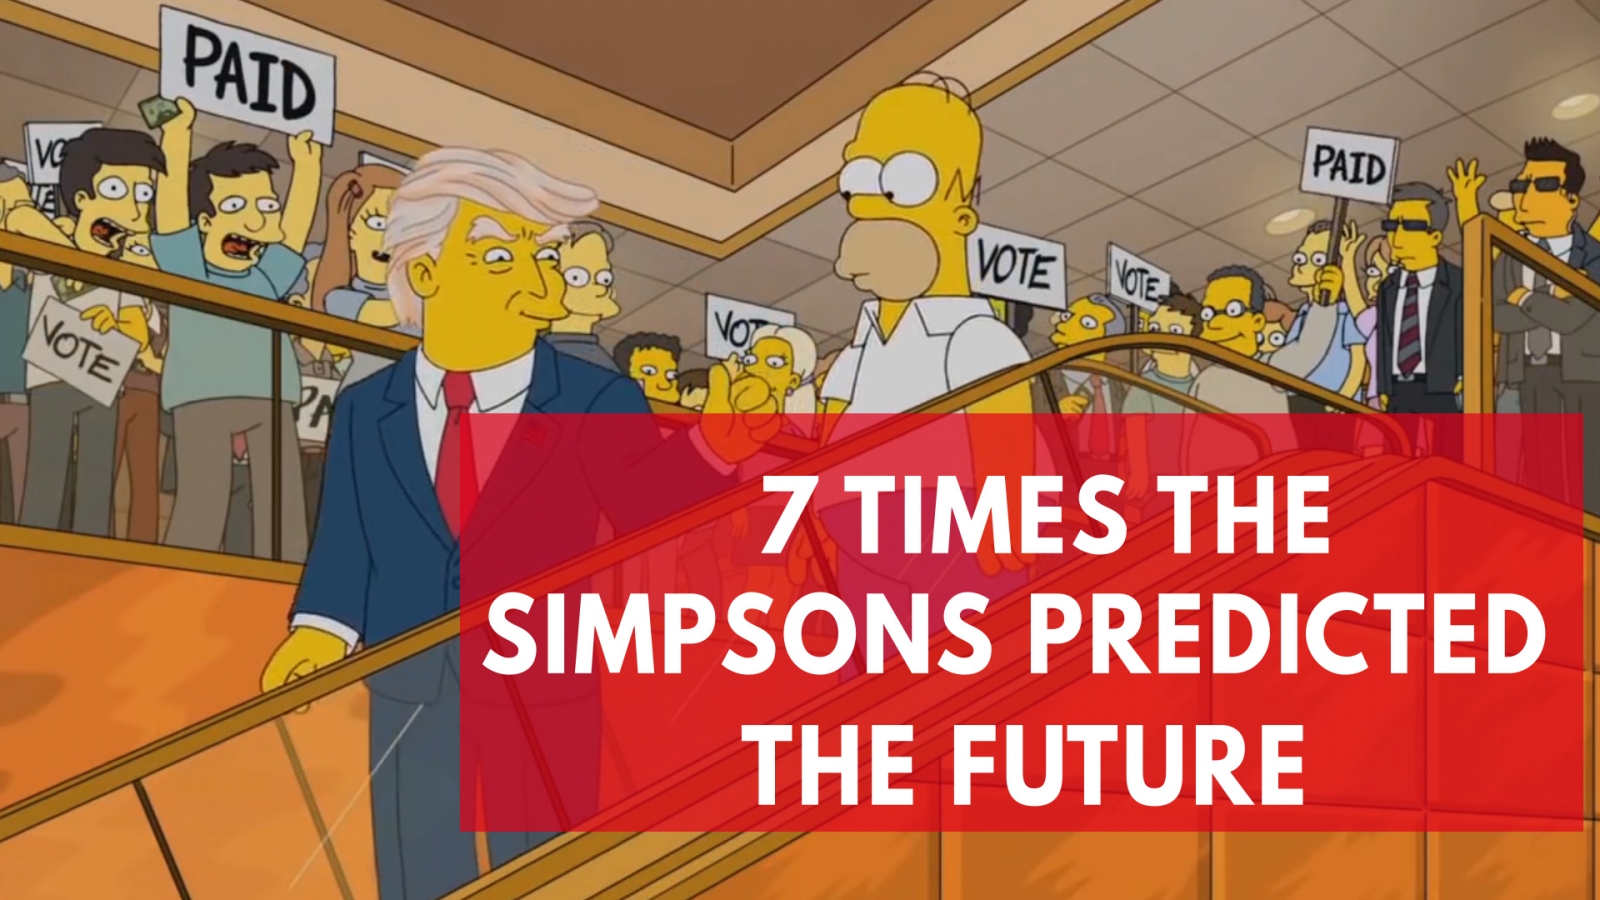 Everything The Simpsons has correctly predicted